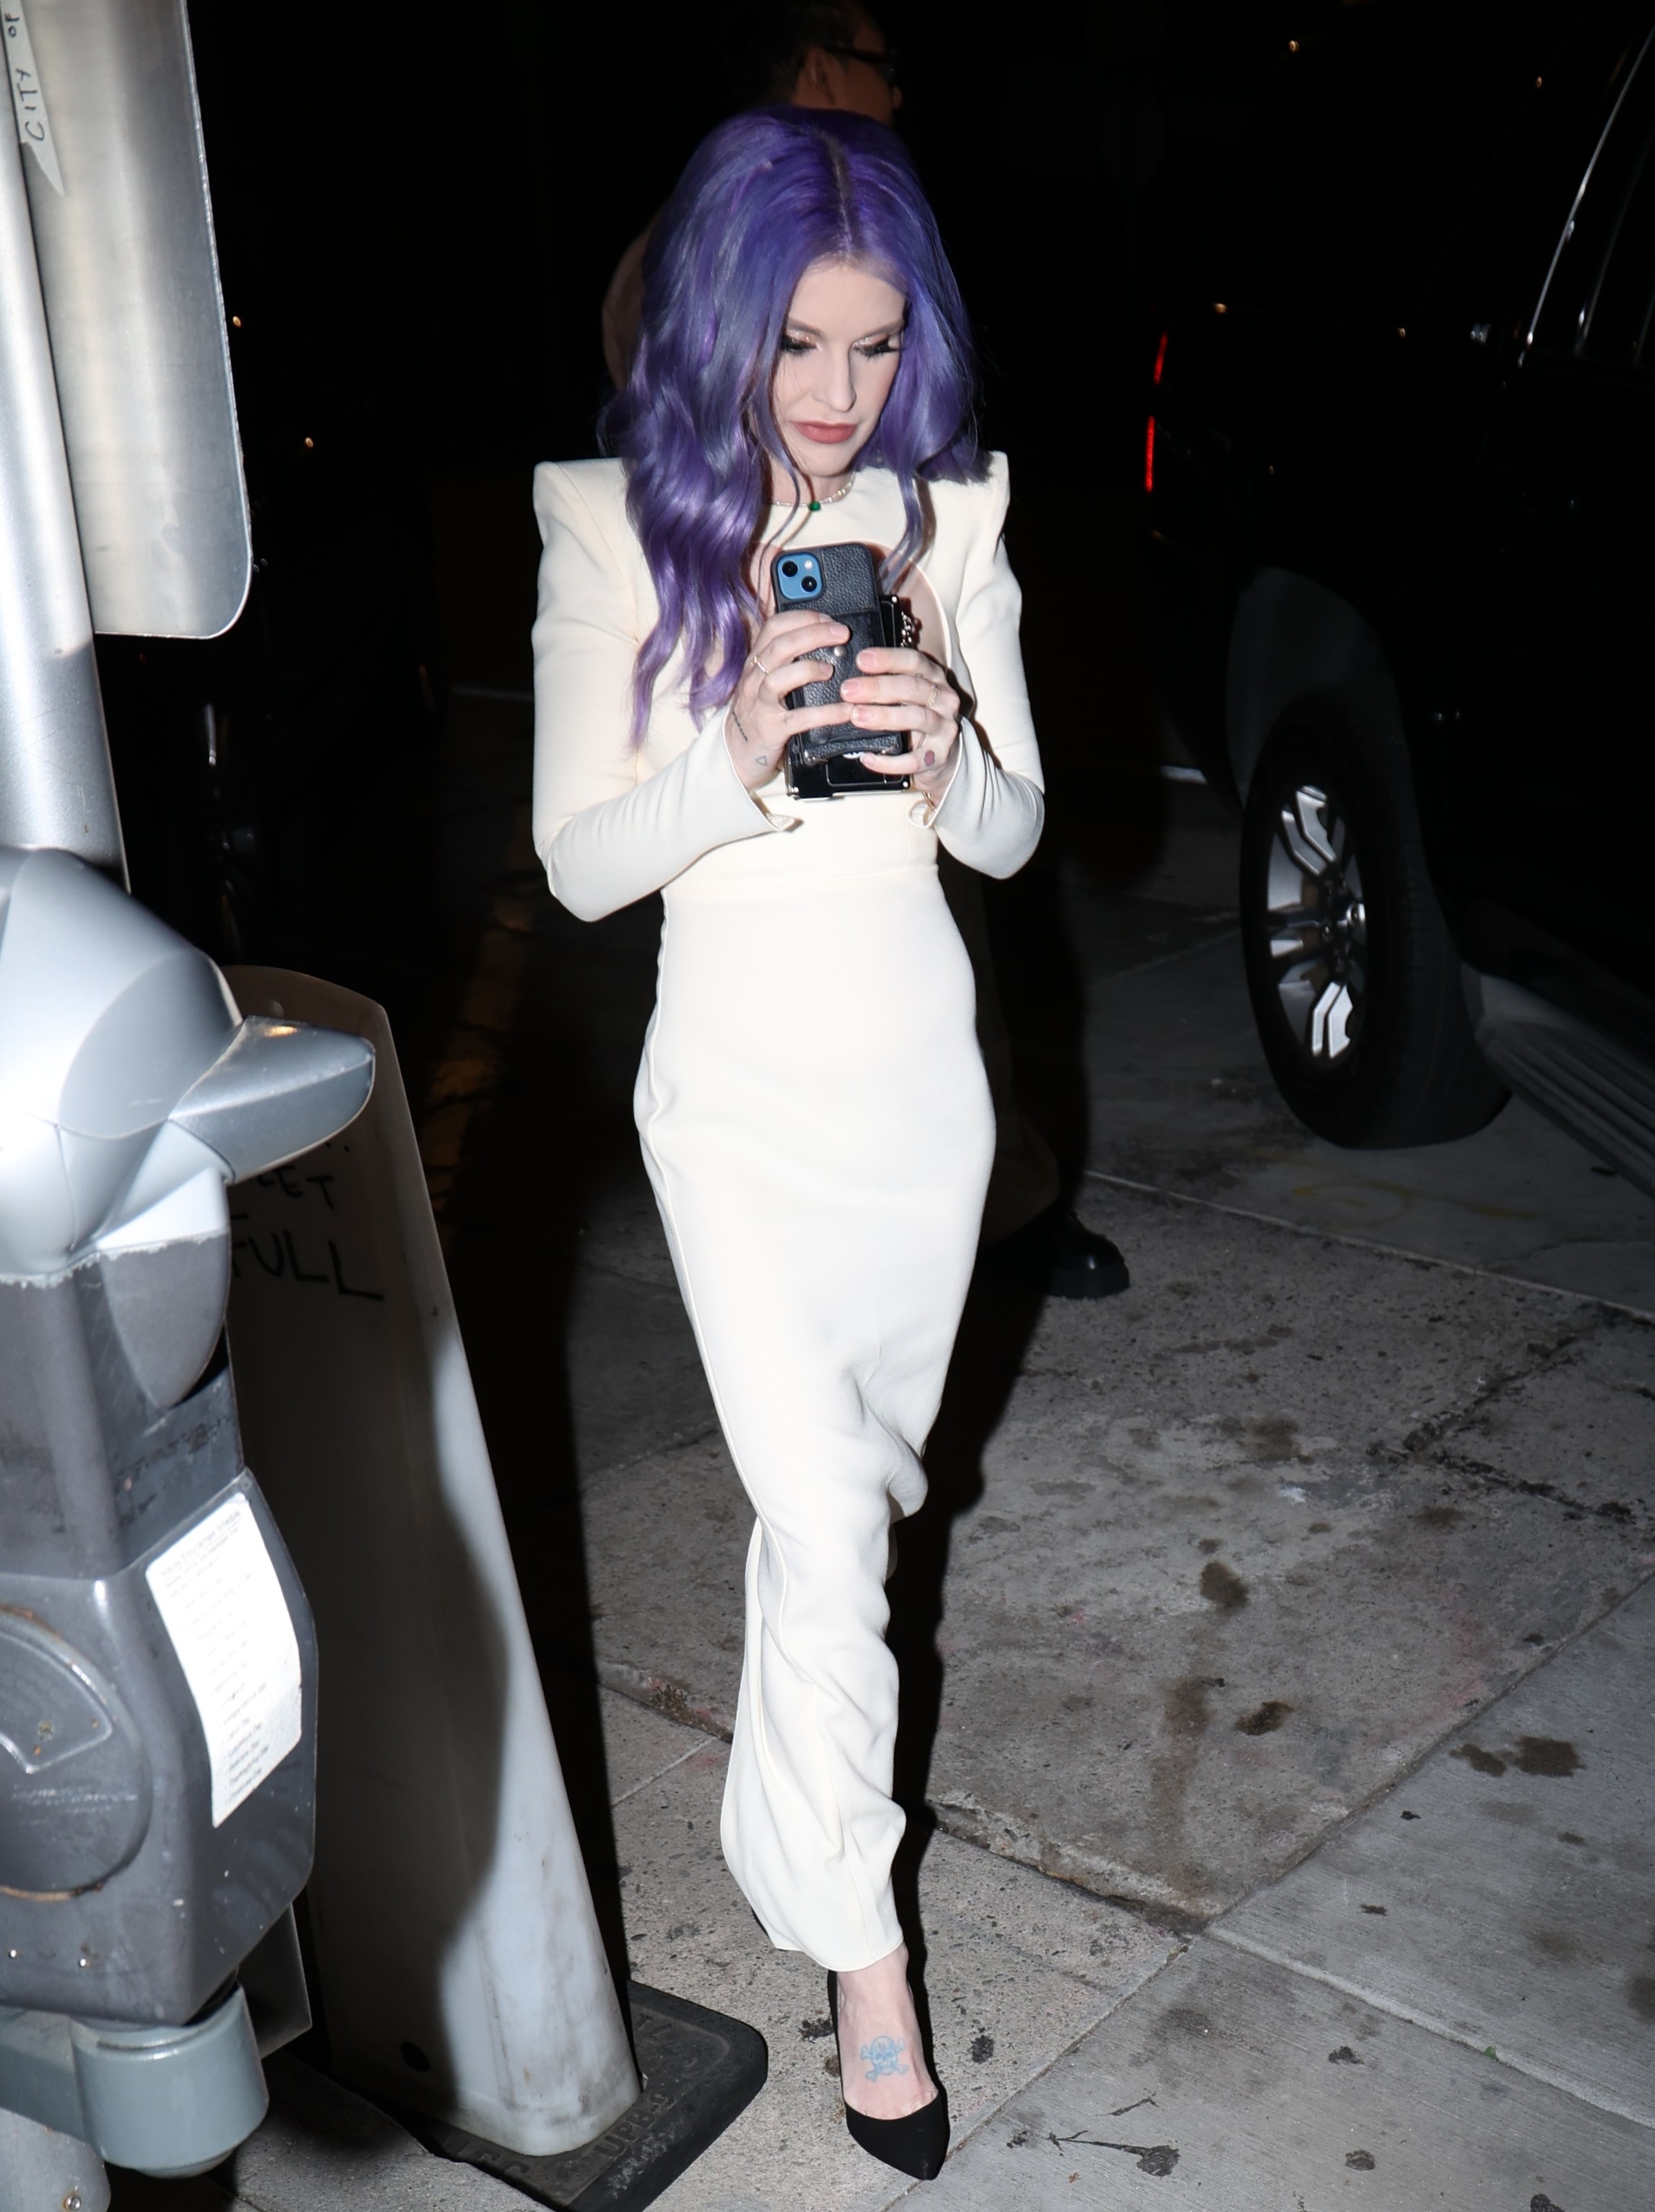 Kelly with purple hair in a white outfit using her phone on a city street at night